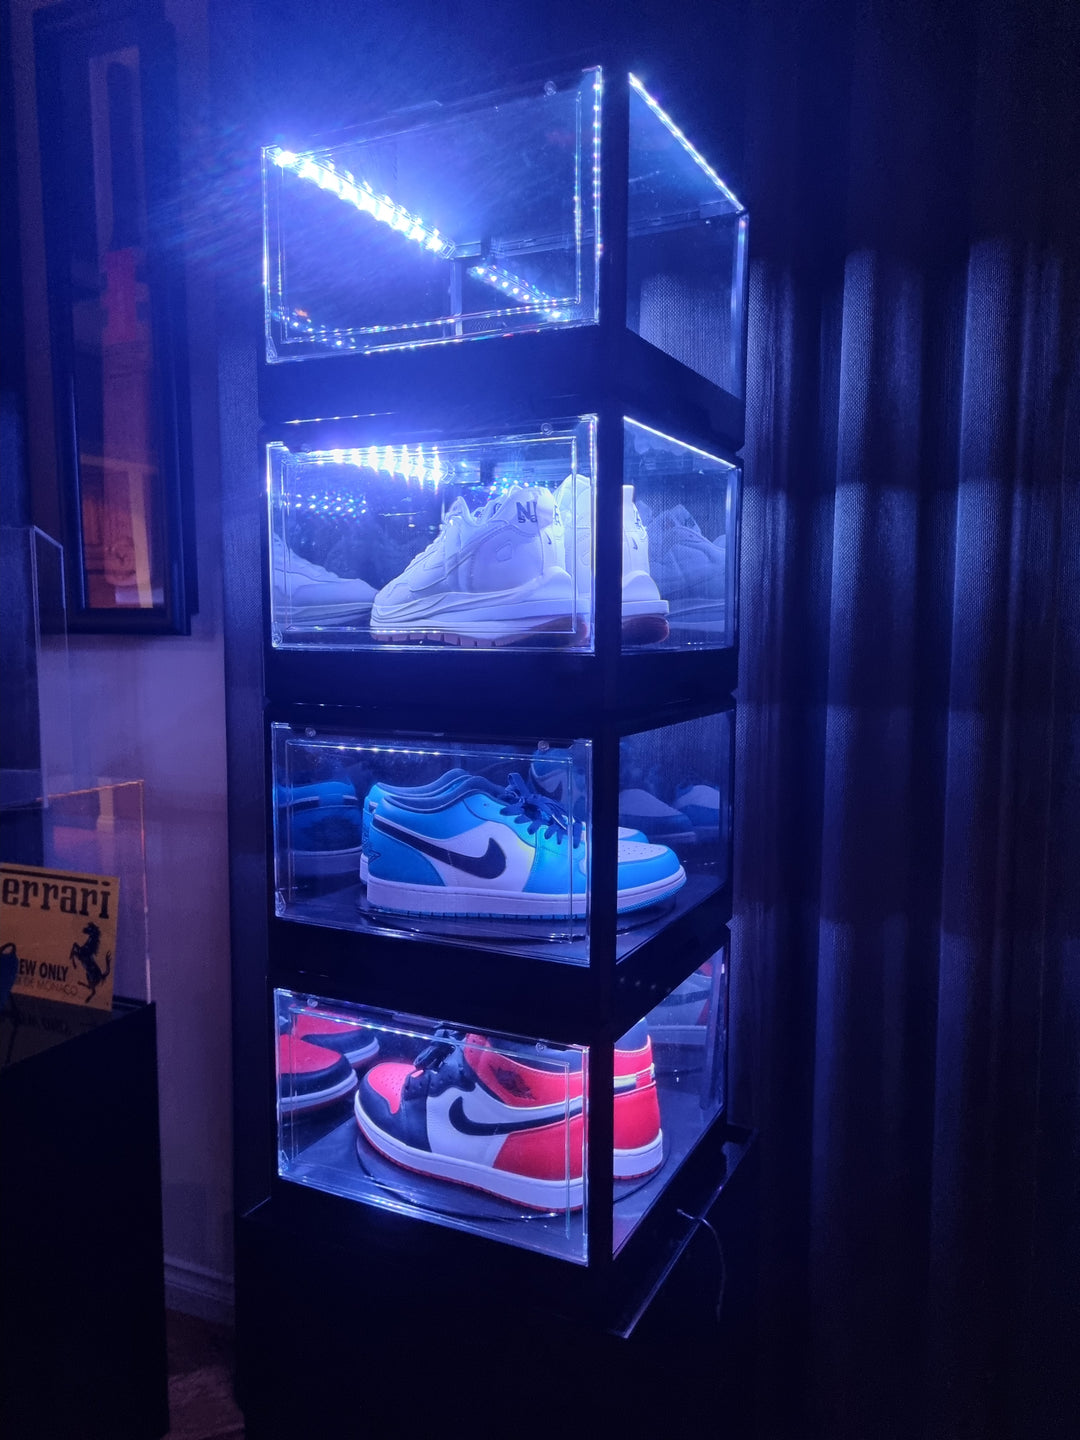 SCHUMI 360° LED Display Crate for Sneakers & Collectibles